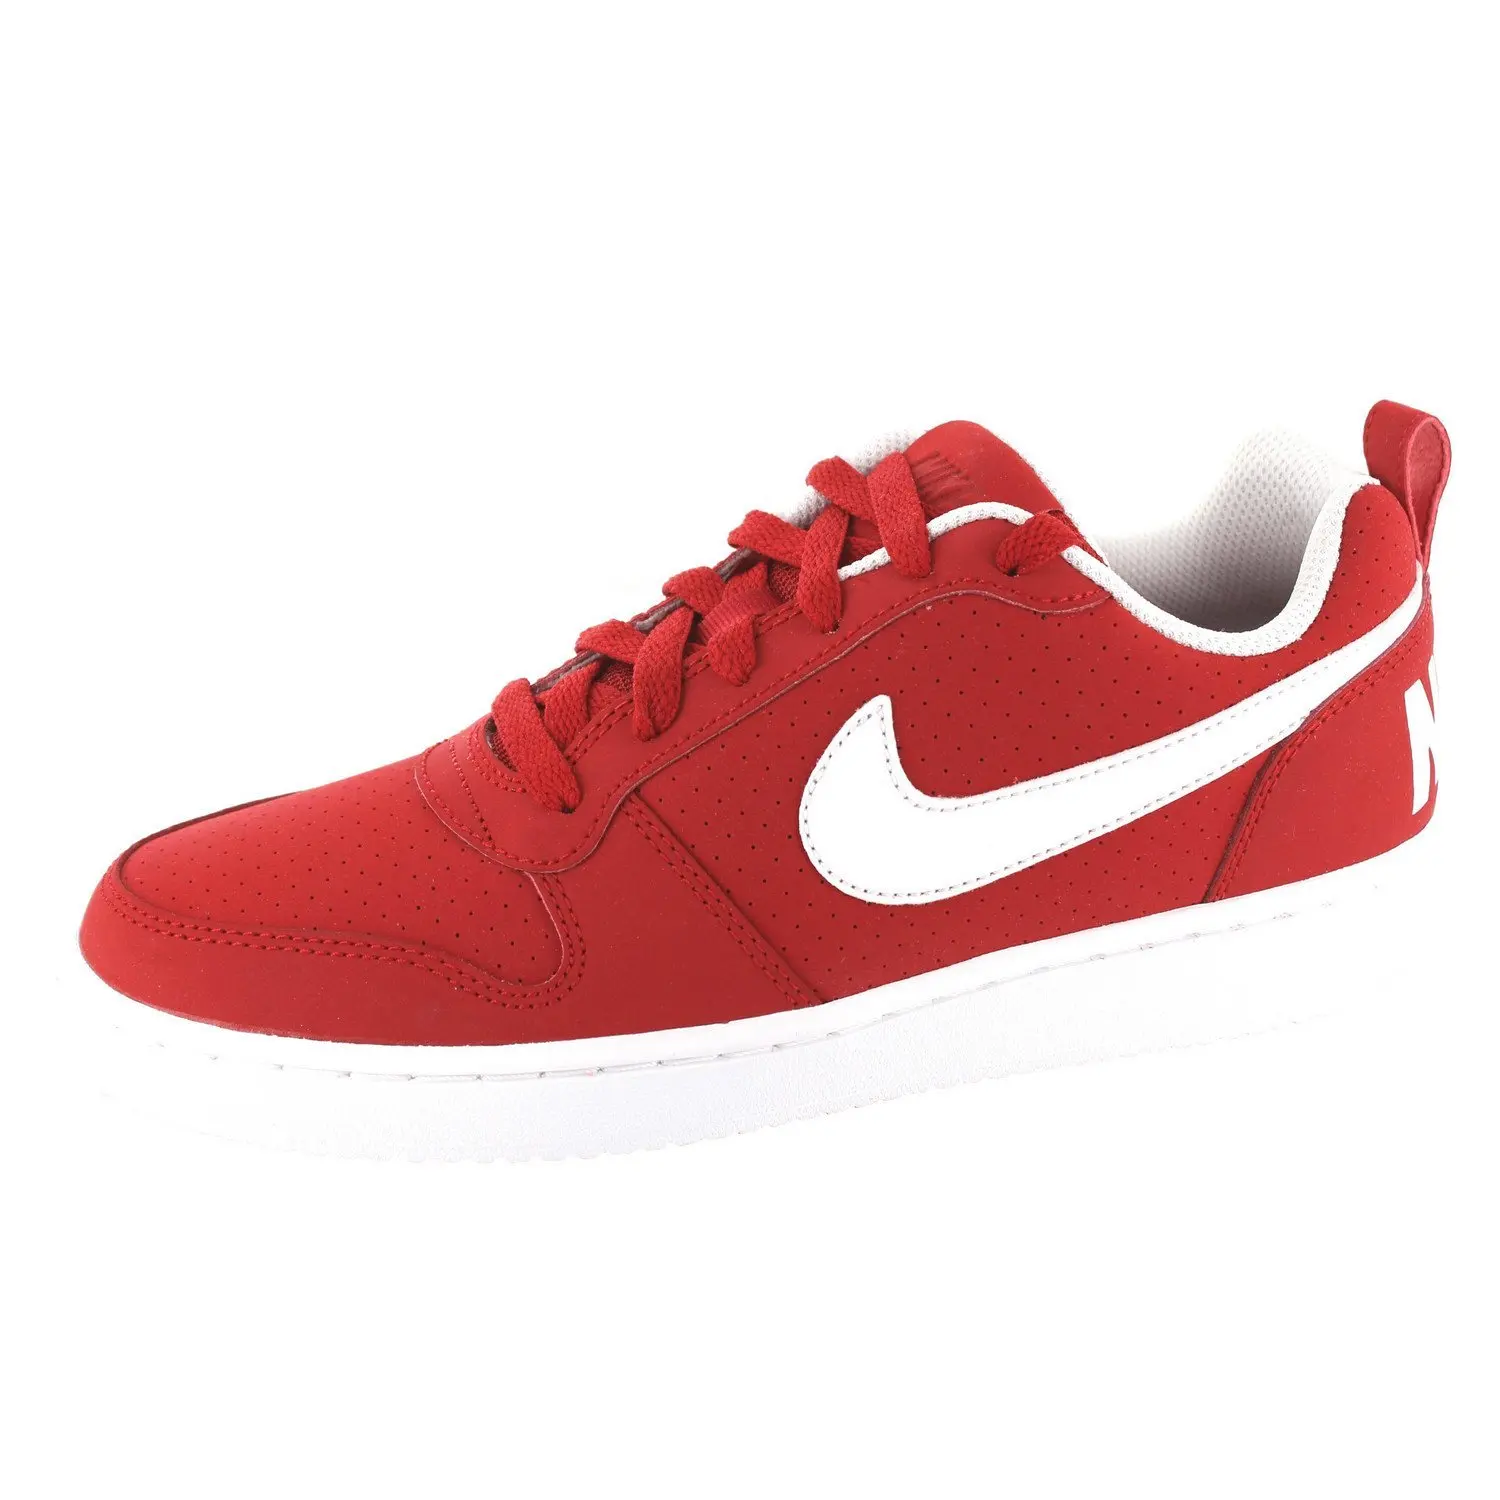 Buy Mens Nike Court Majestic Casual Low Top Suede Shoes Lace Up ...